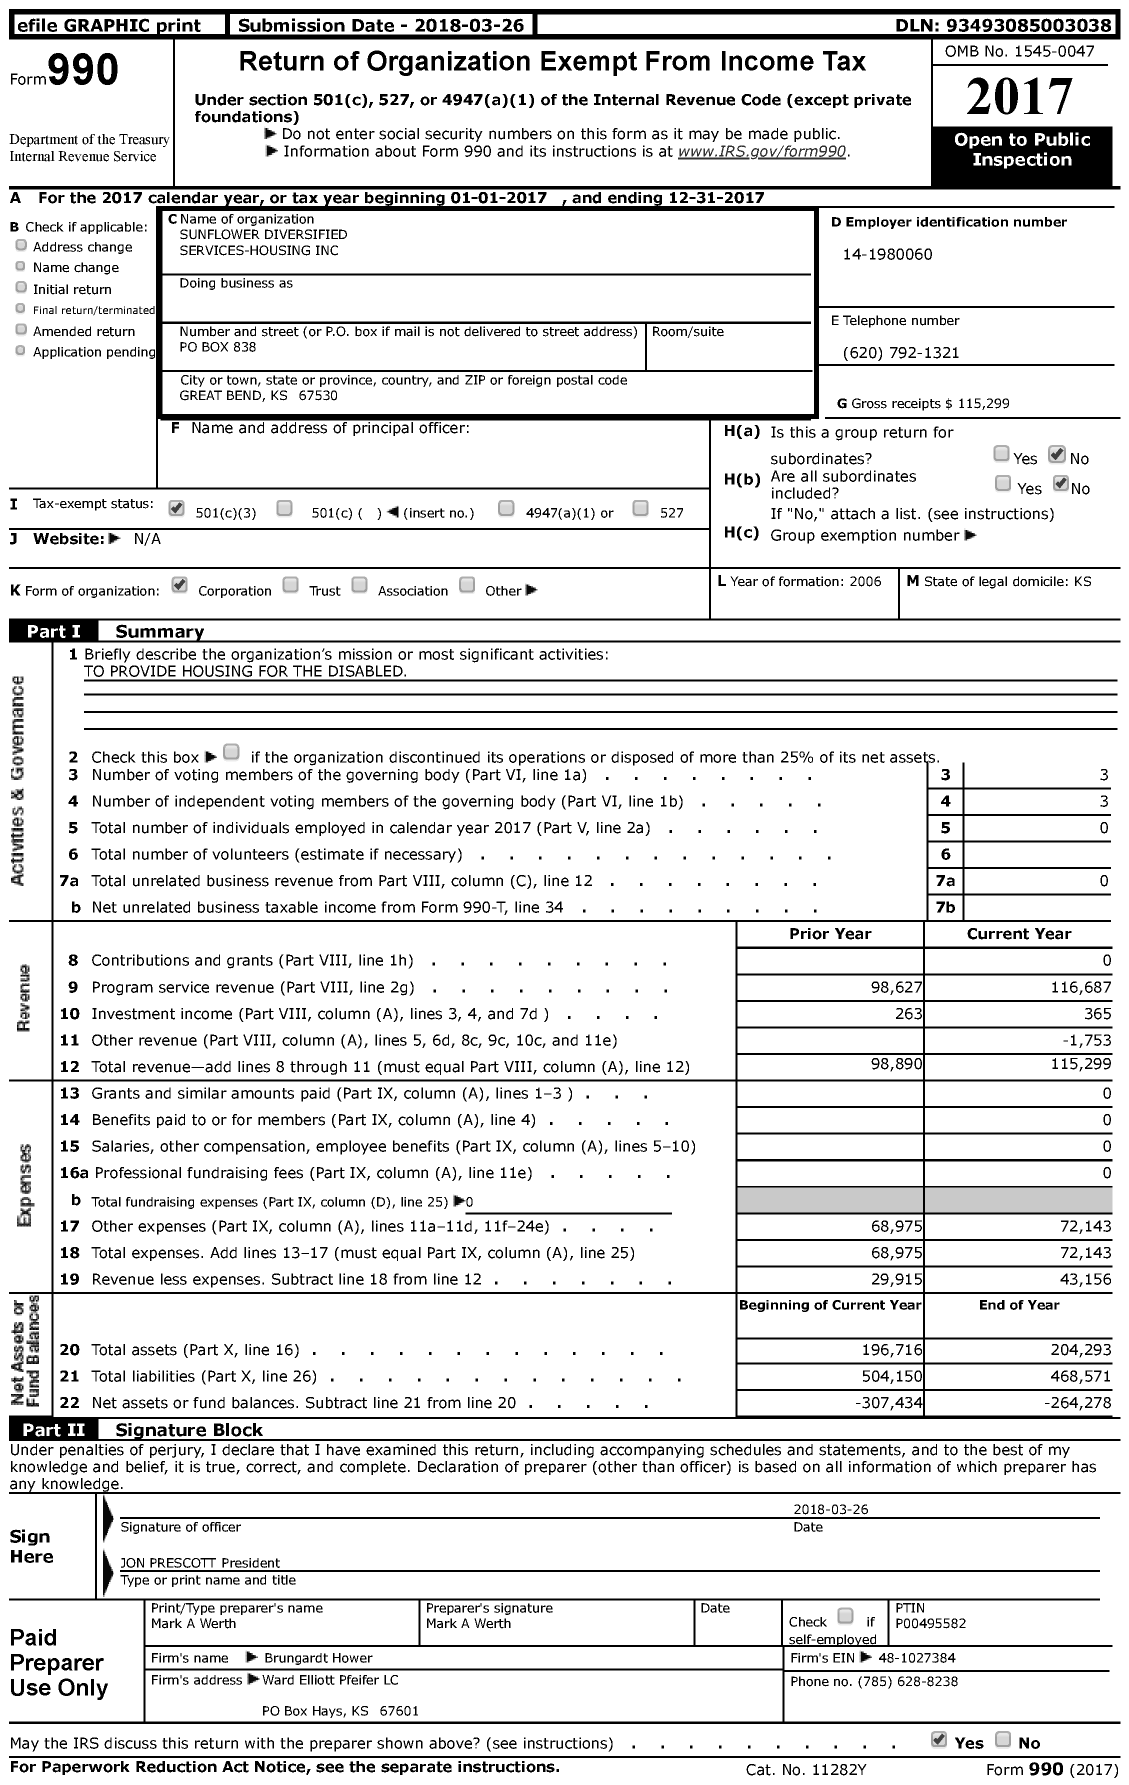 Image of first page of 2017 Form 990 for Sunflower Diversified Services - Housing